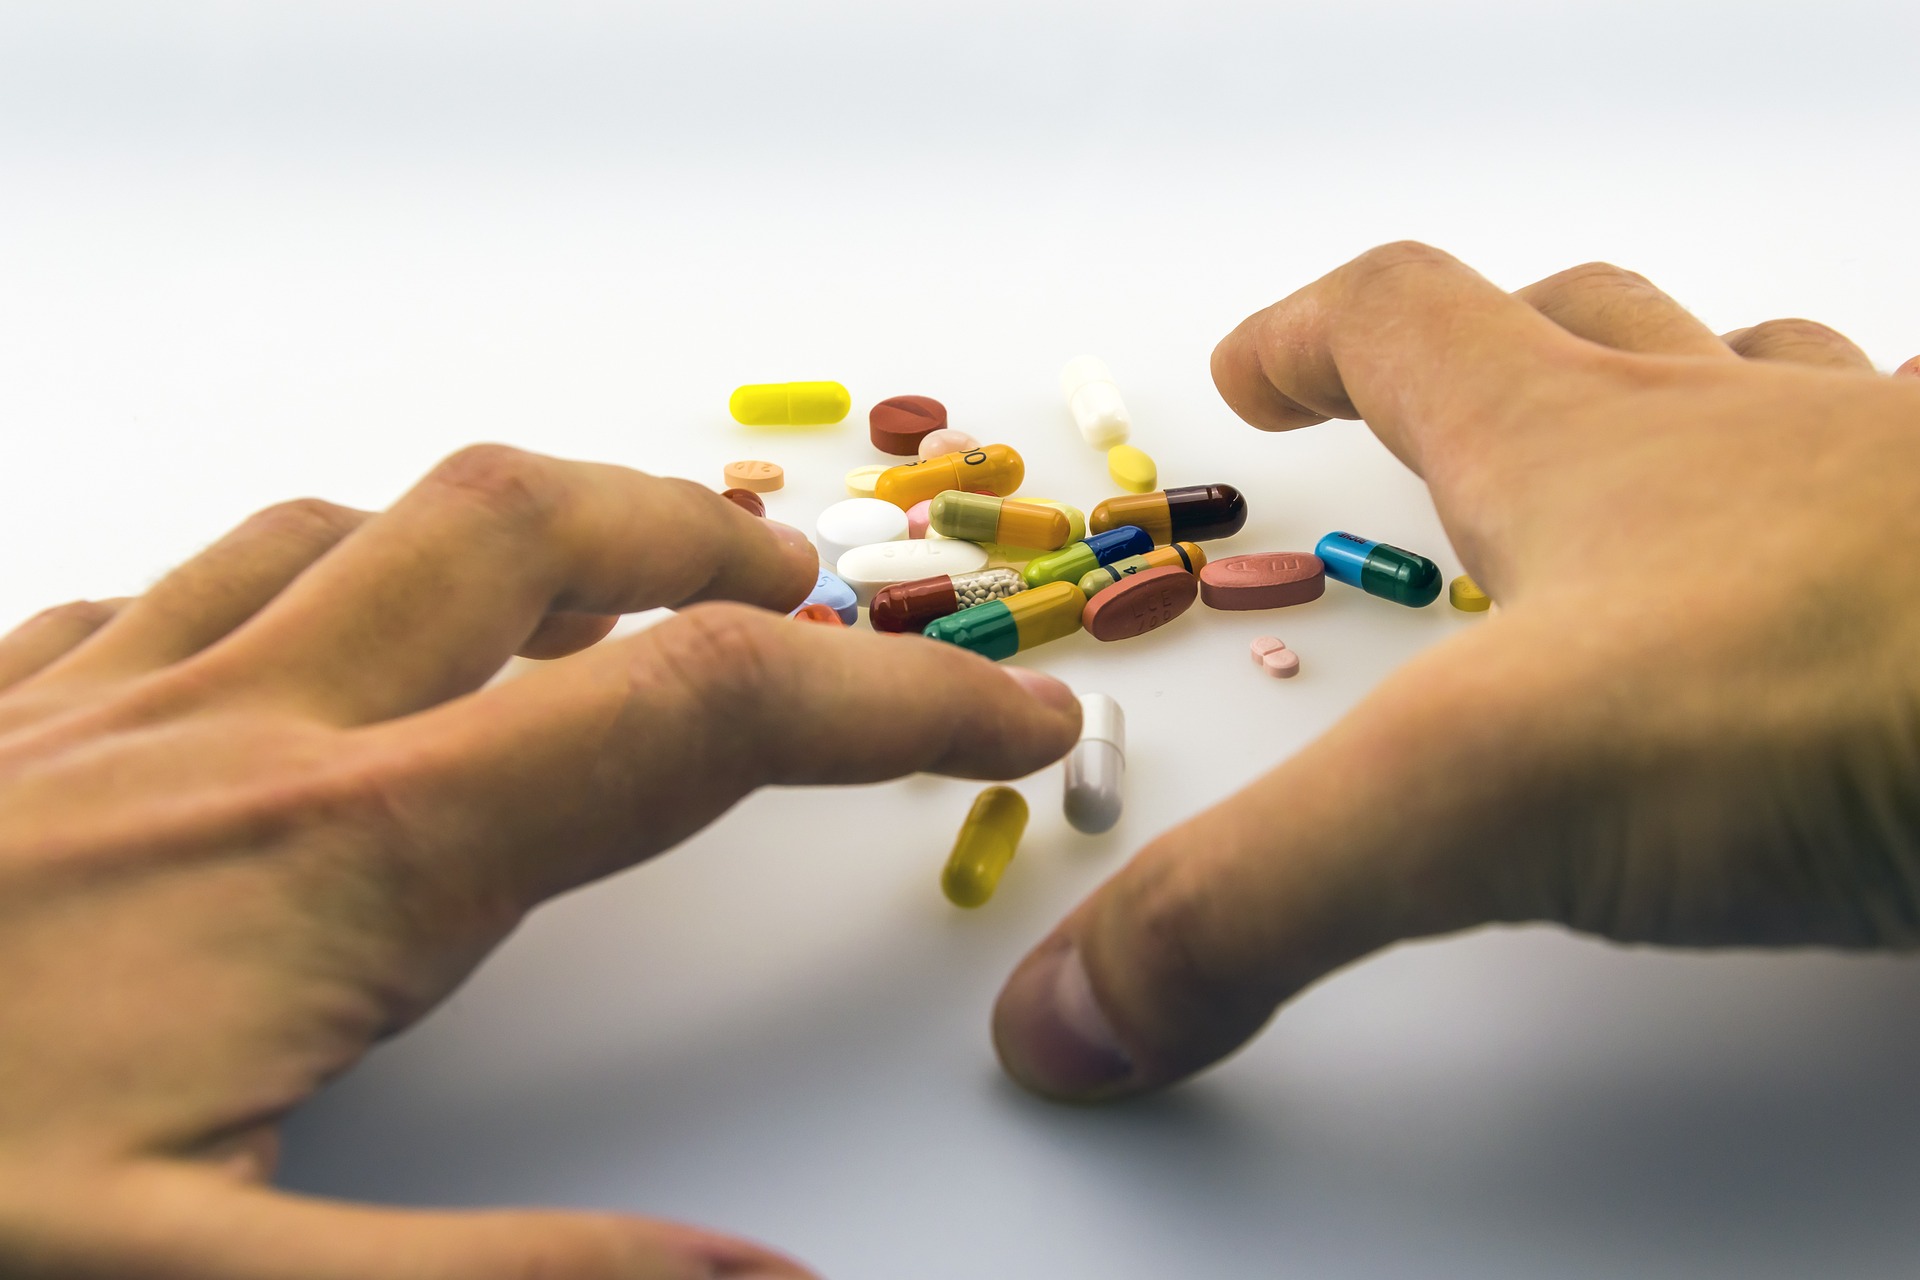 Hands of a male adult about to grab a pile of assorted medicines, some in capsules; others in tablet forms